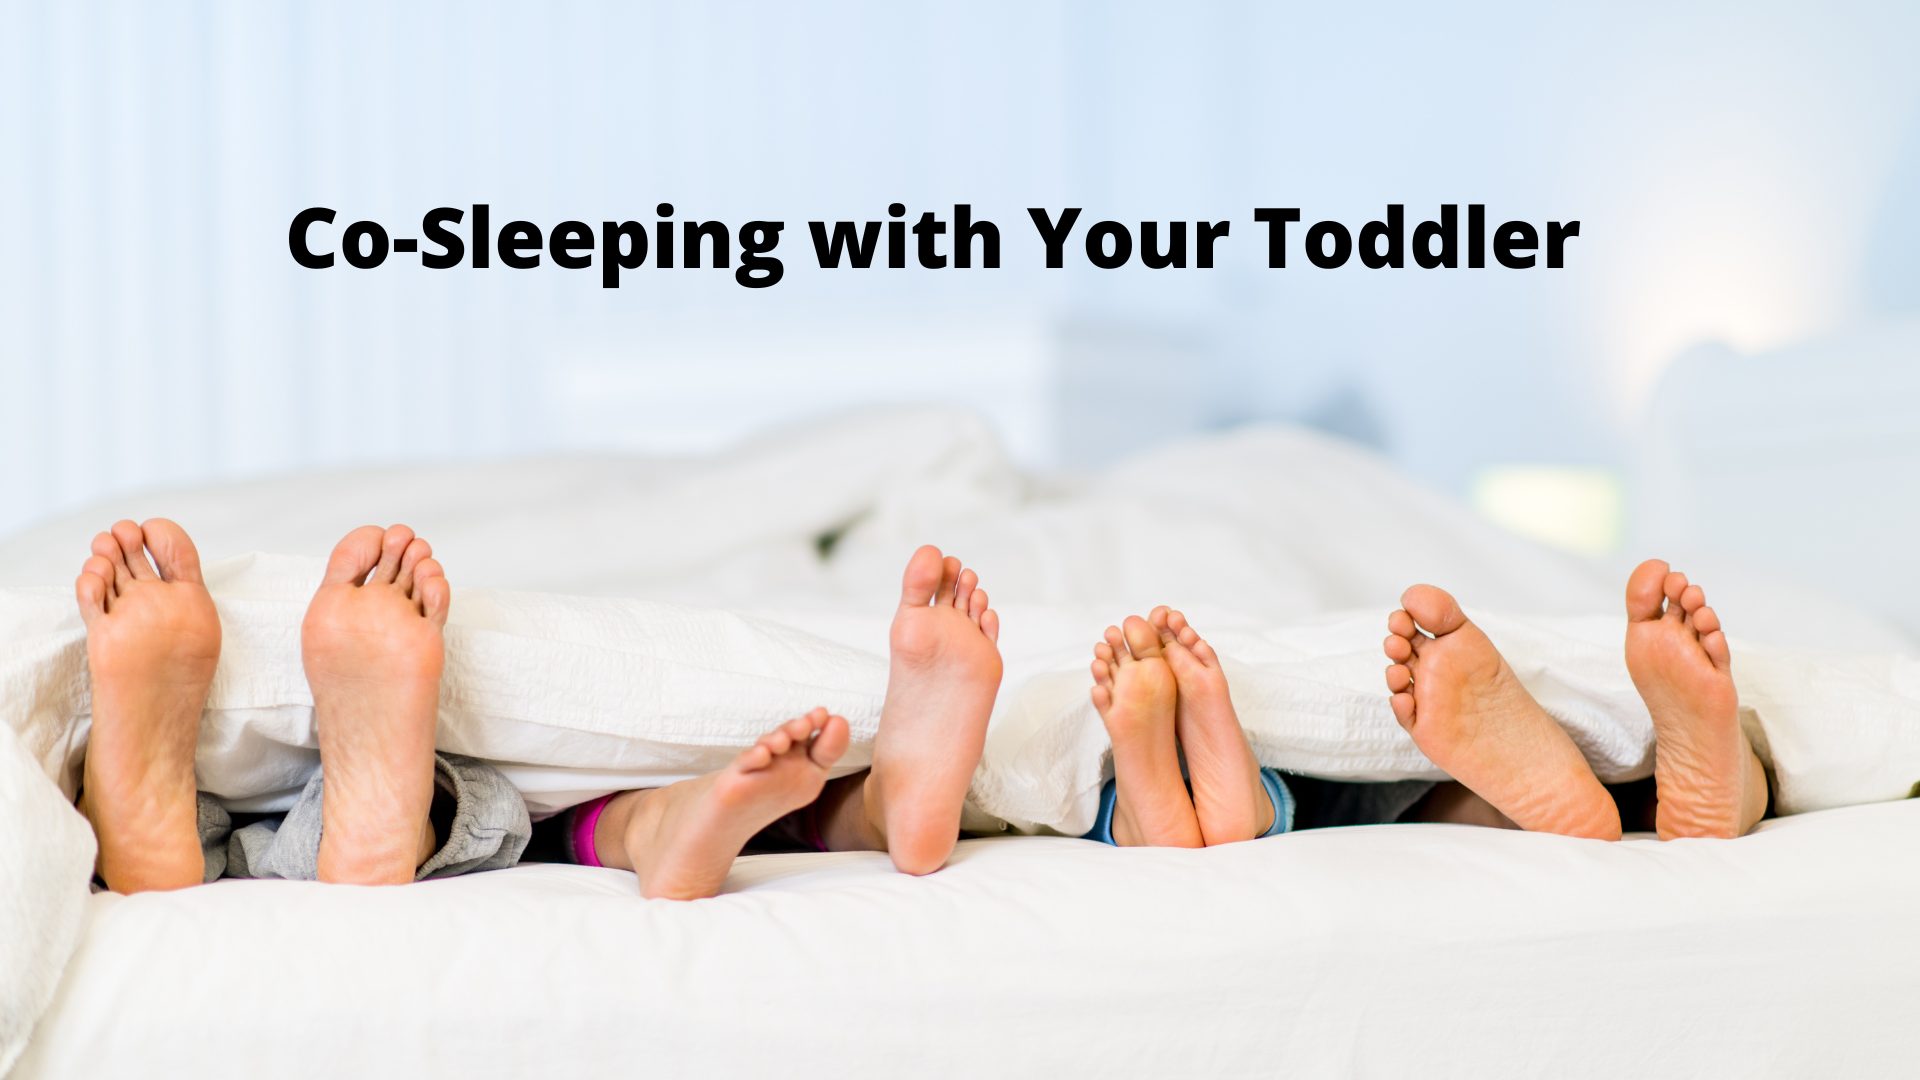 Help Your Baby or Toddler Sleep Safely - Together by St. Jude™